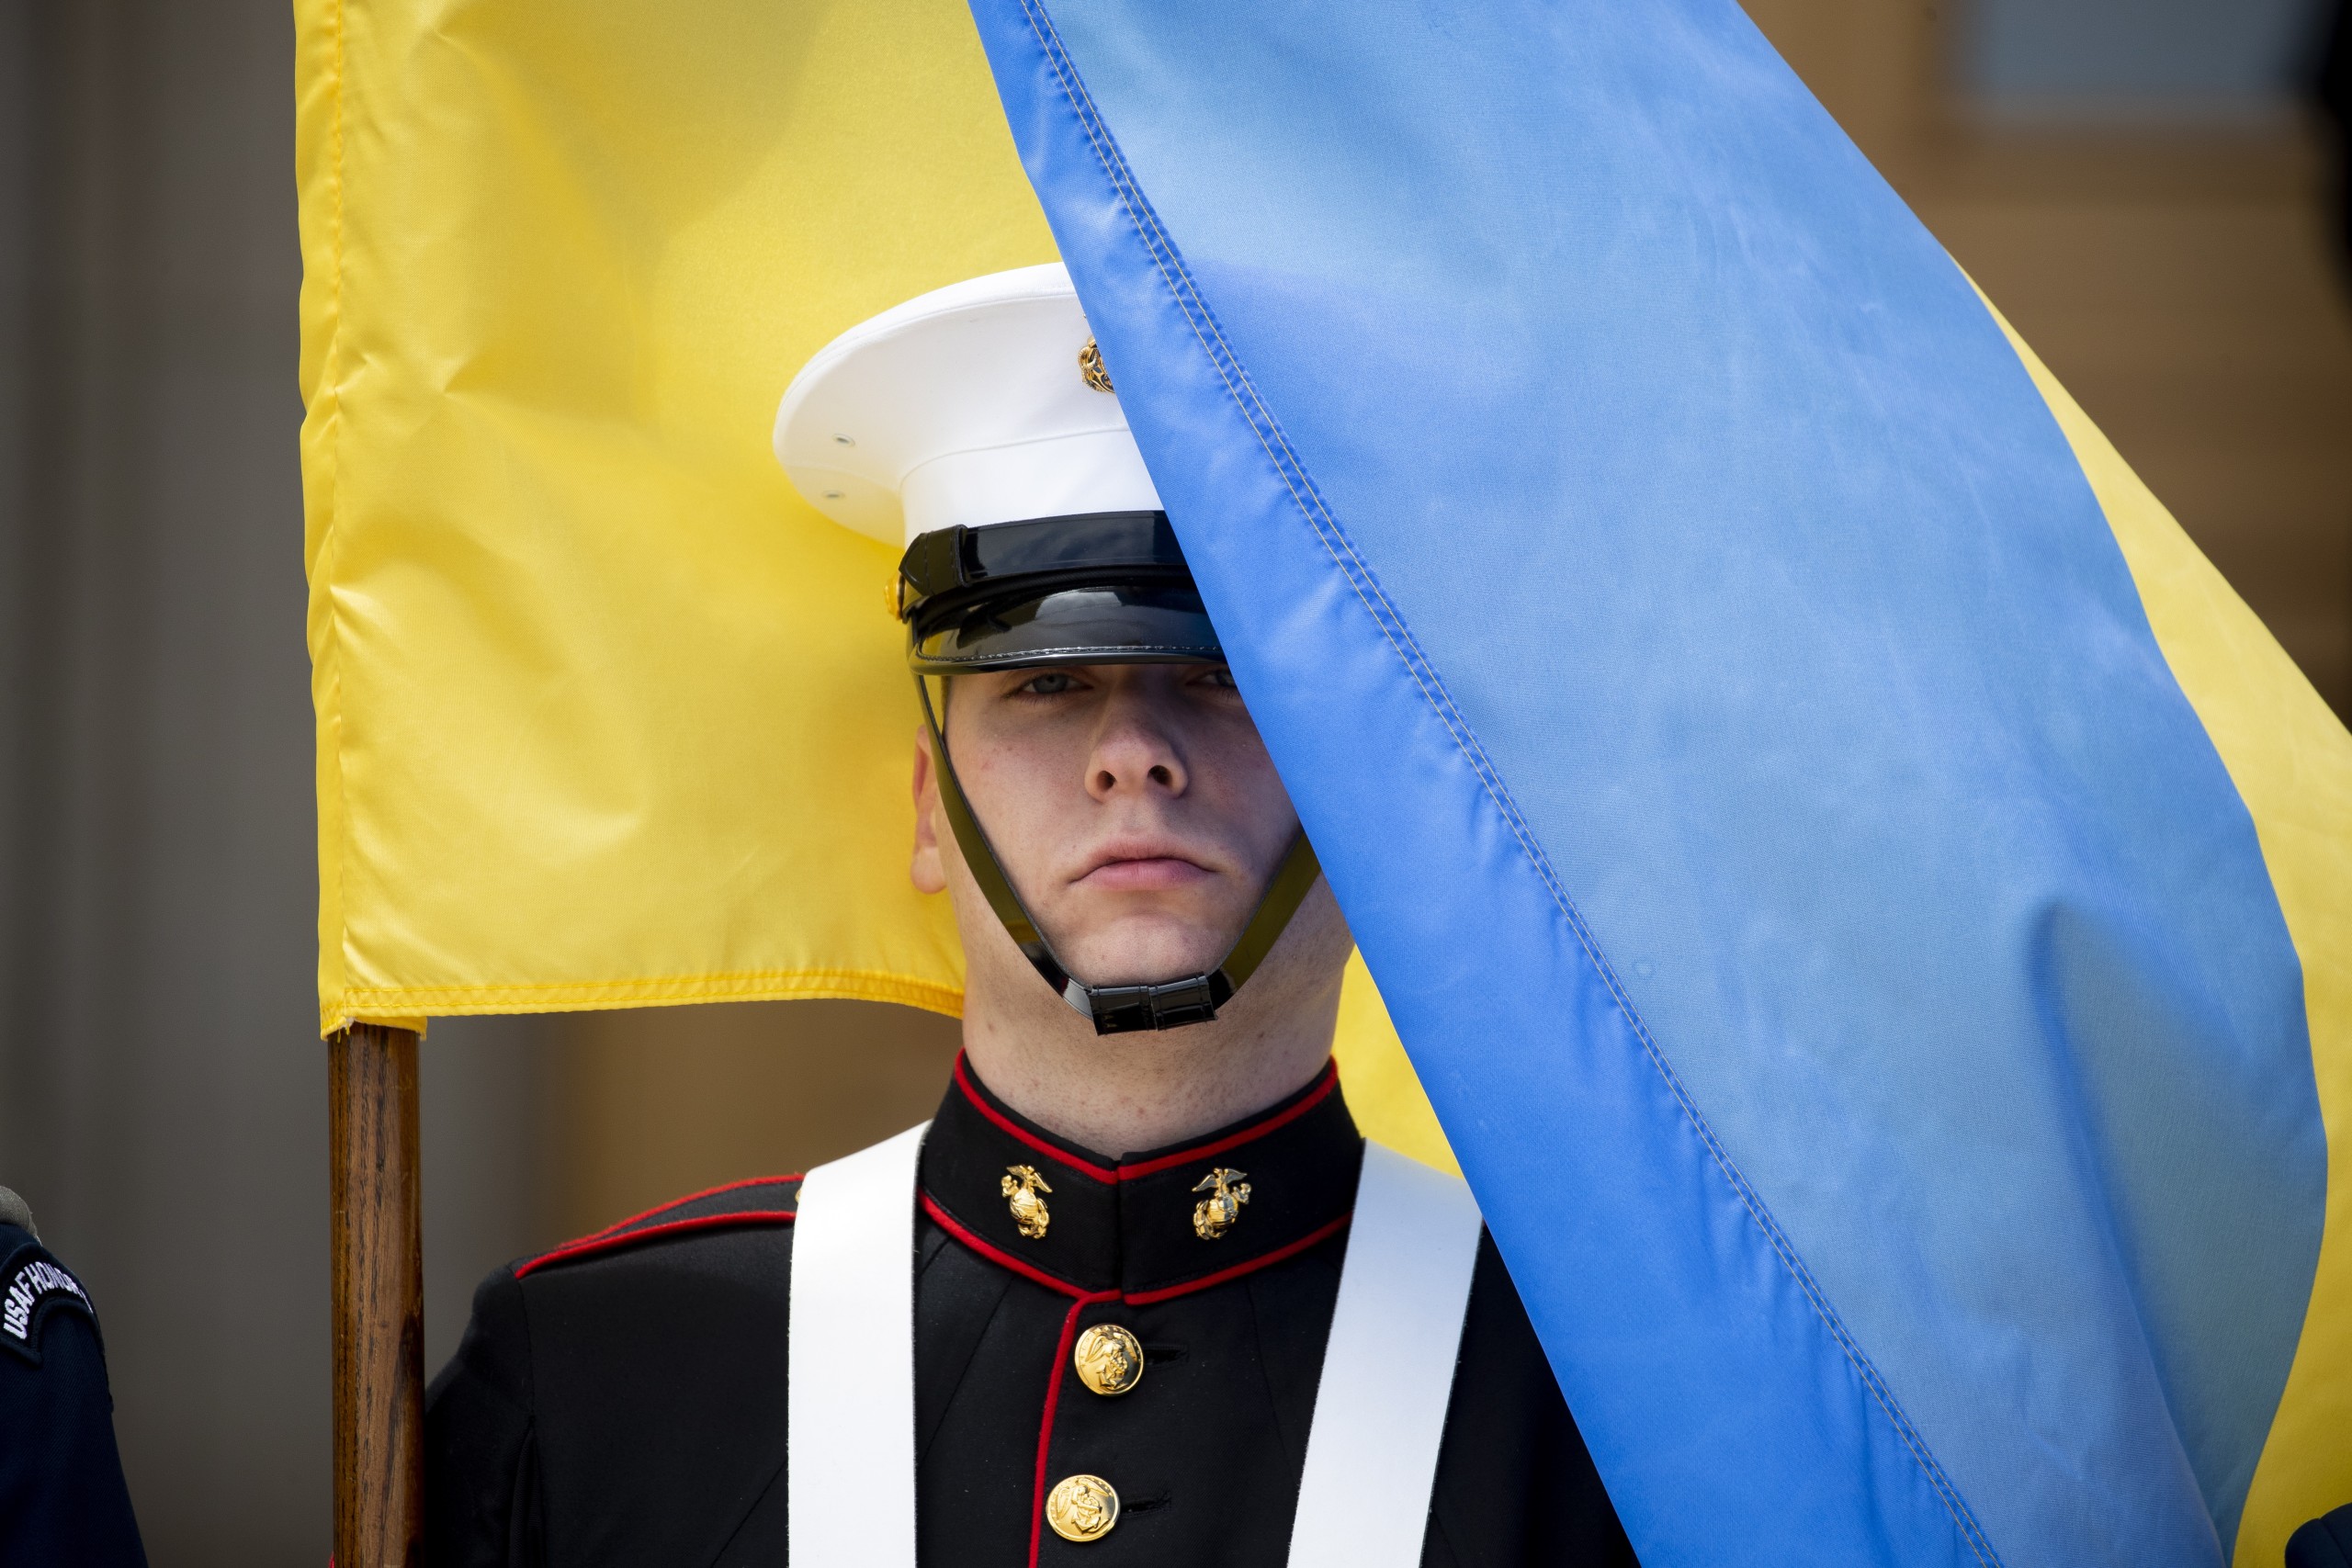 epa09901178 A member of a United States military color guard holds the national flag of Ukraine for an honor cordon ceremony welcoming Prime Minister of Ukraine Denys Shmyhal (not pictured) at the Pentagon in Arlington, Virginia, USA, 21 April 2022. Shmyhal is in Washington for a series of high-level meetings seeking continued US military and financial commitments to Ukraine as the Russian invasion continues in the eastern European country.  EPA/MICHAEL REYNOLDS